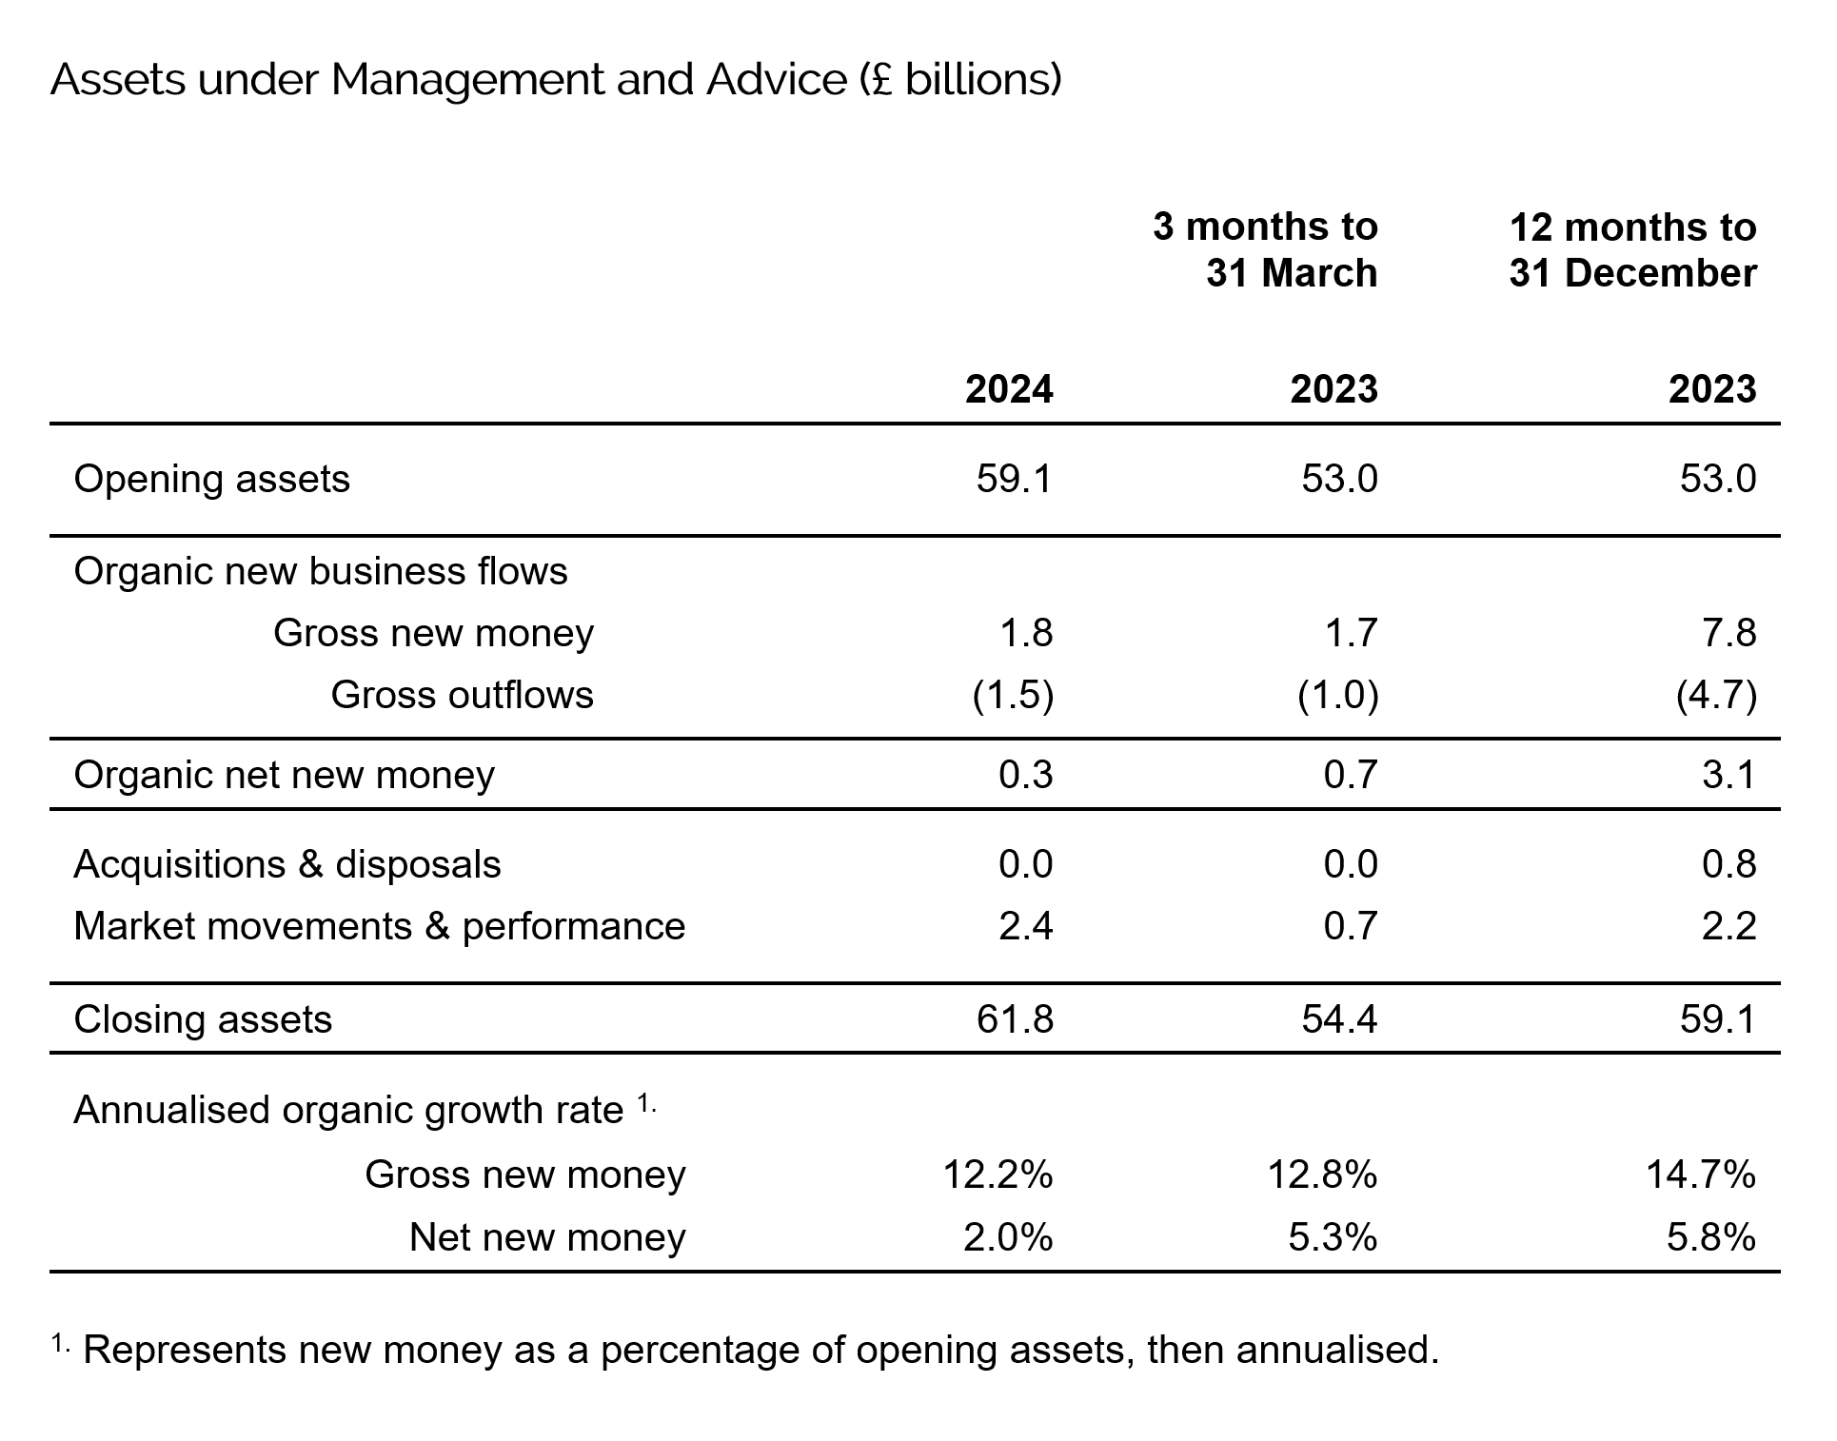 Assets under Management & Advice (£bn) as at 31 March 2024